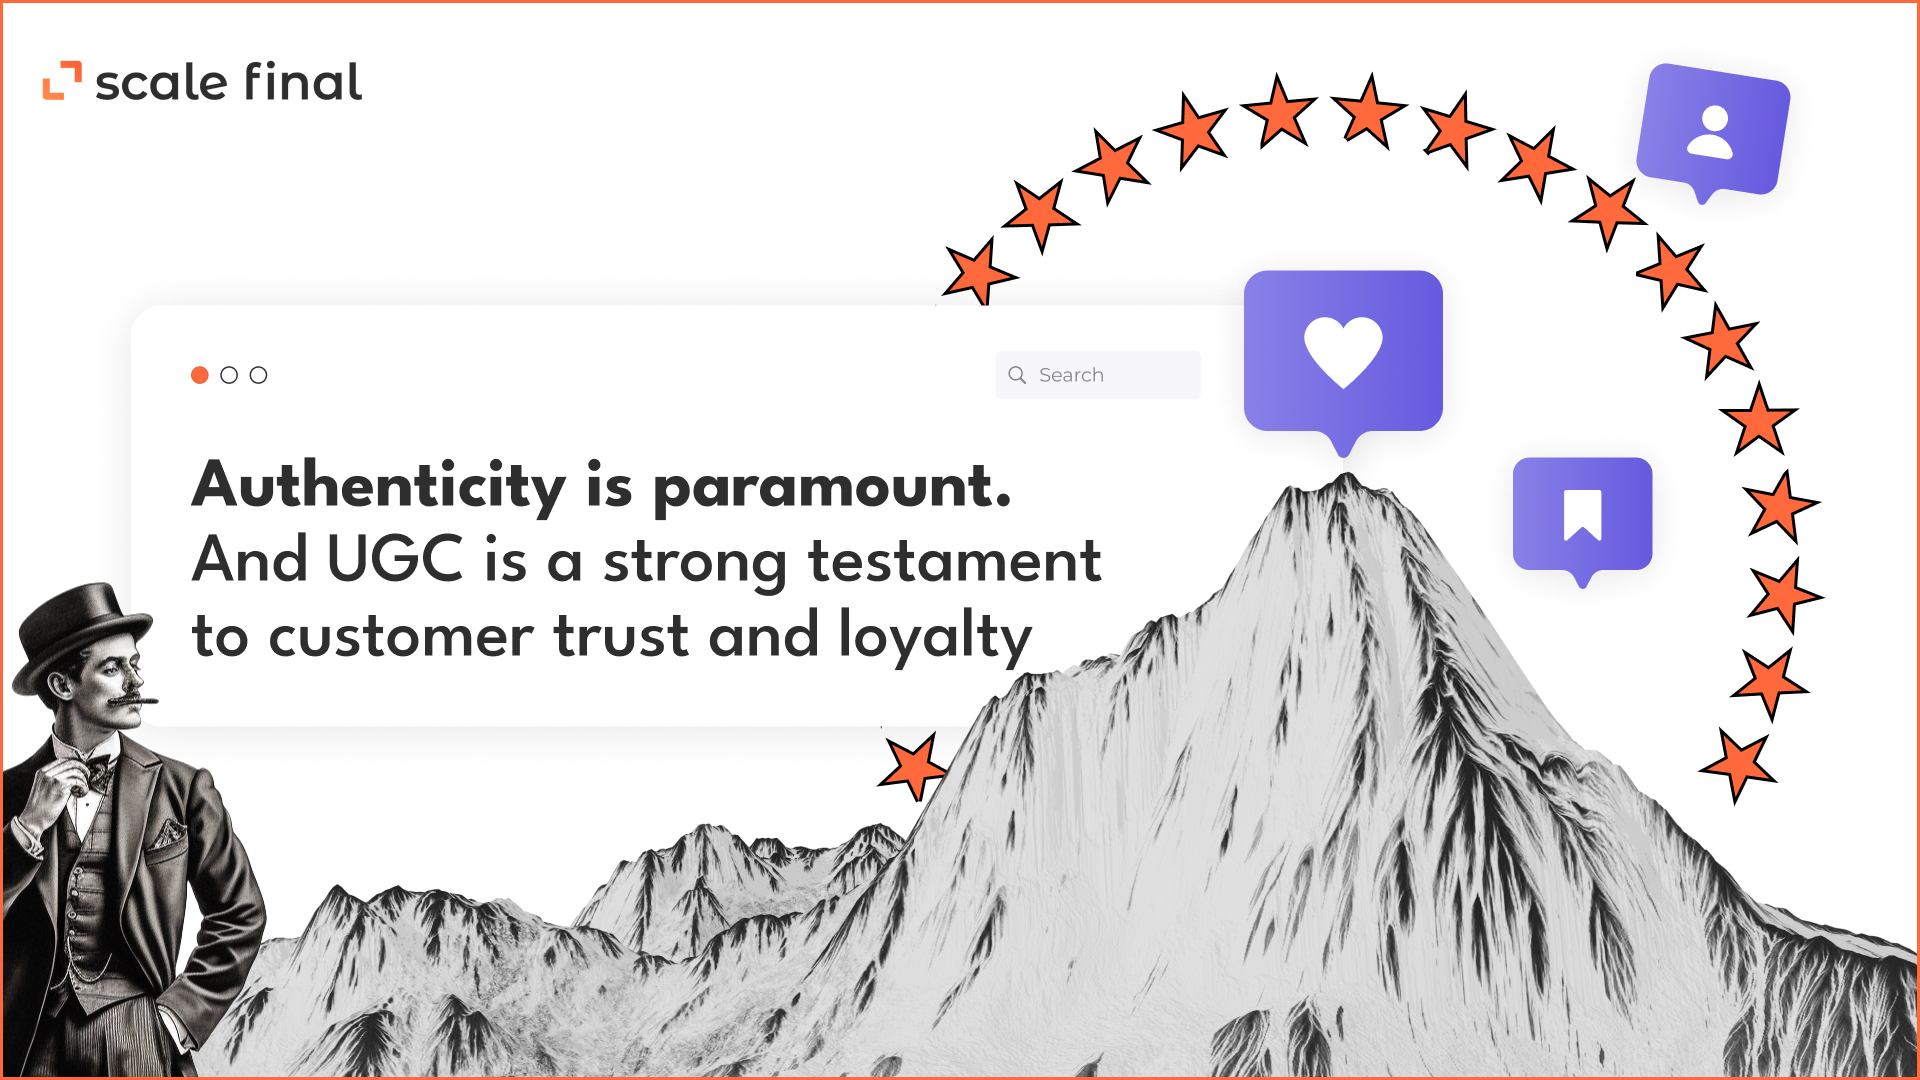 Authenticity is paramount. And UGC is a strong testament to customer trust and loyalty.